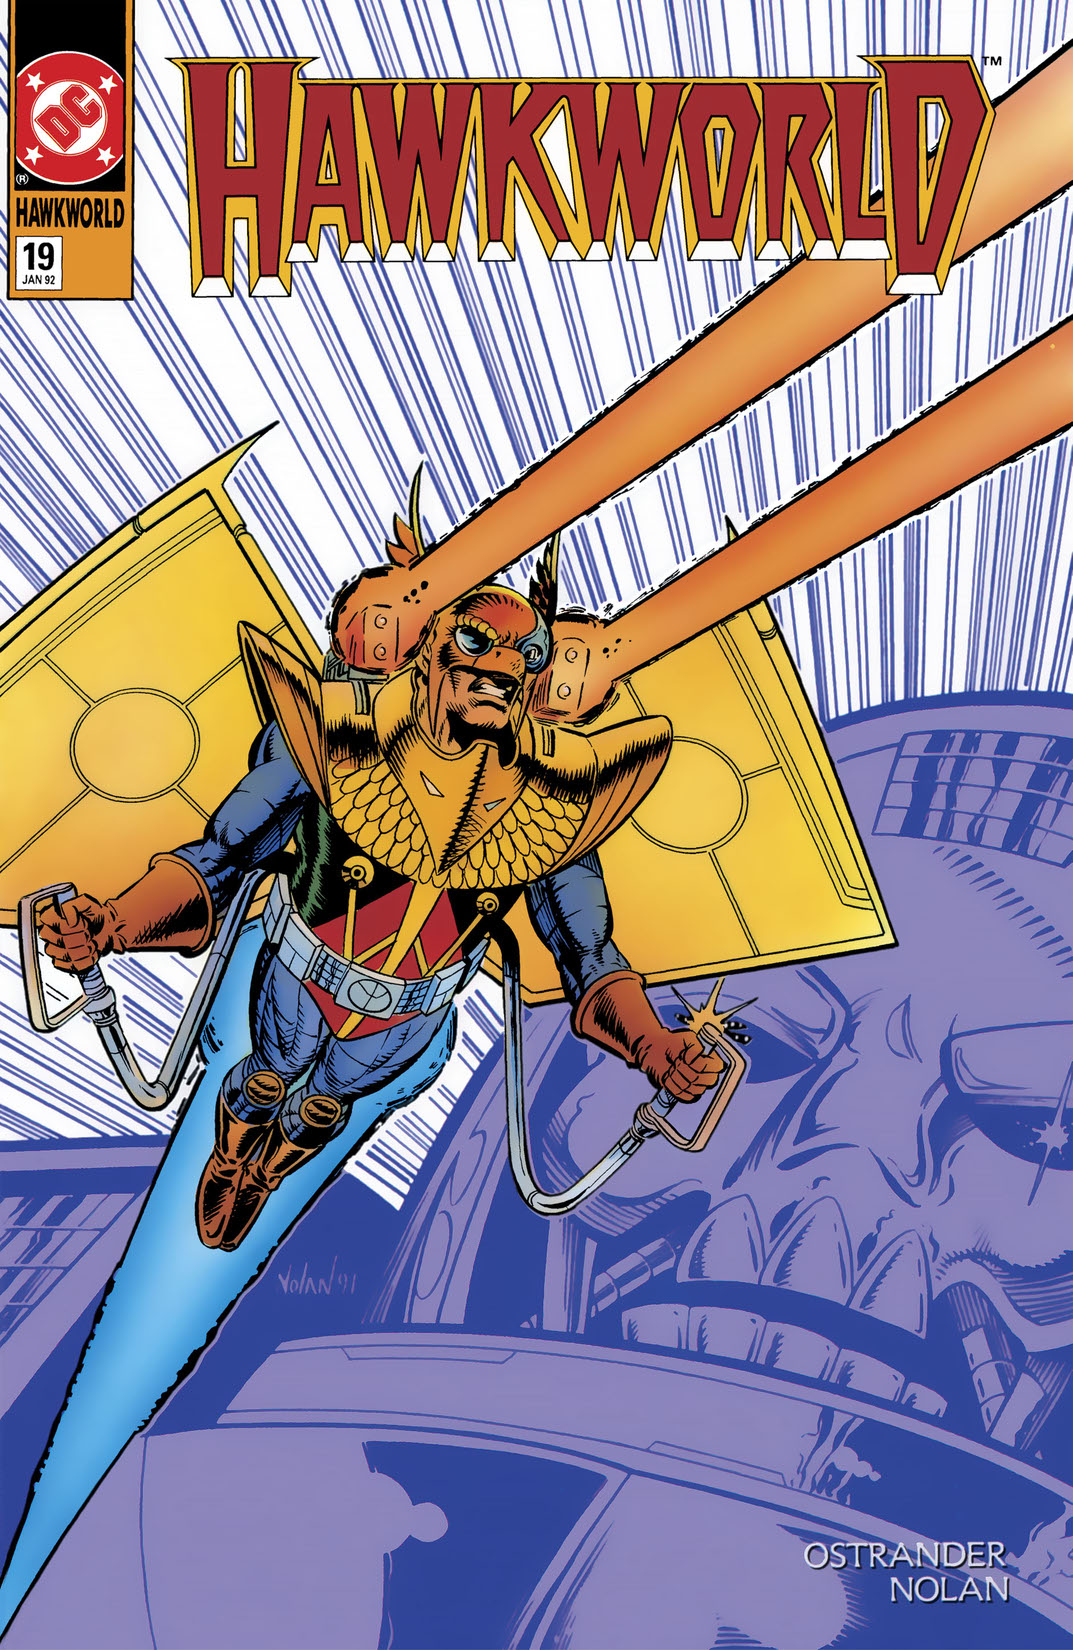 Hawkworld (1989-) #19 preview images